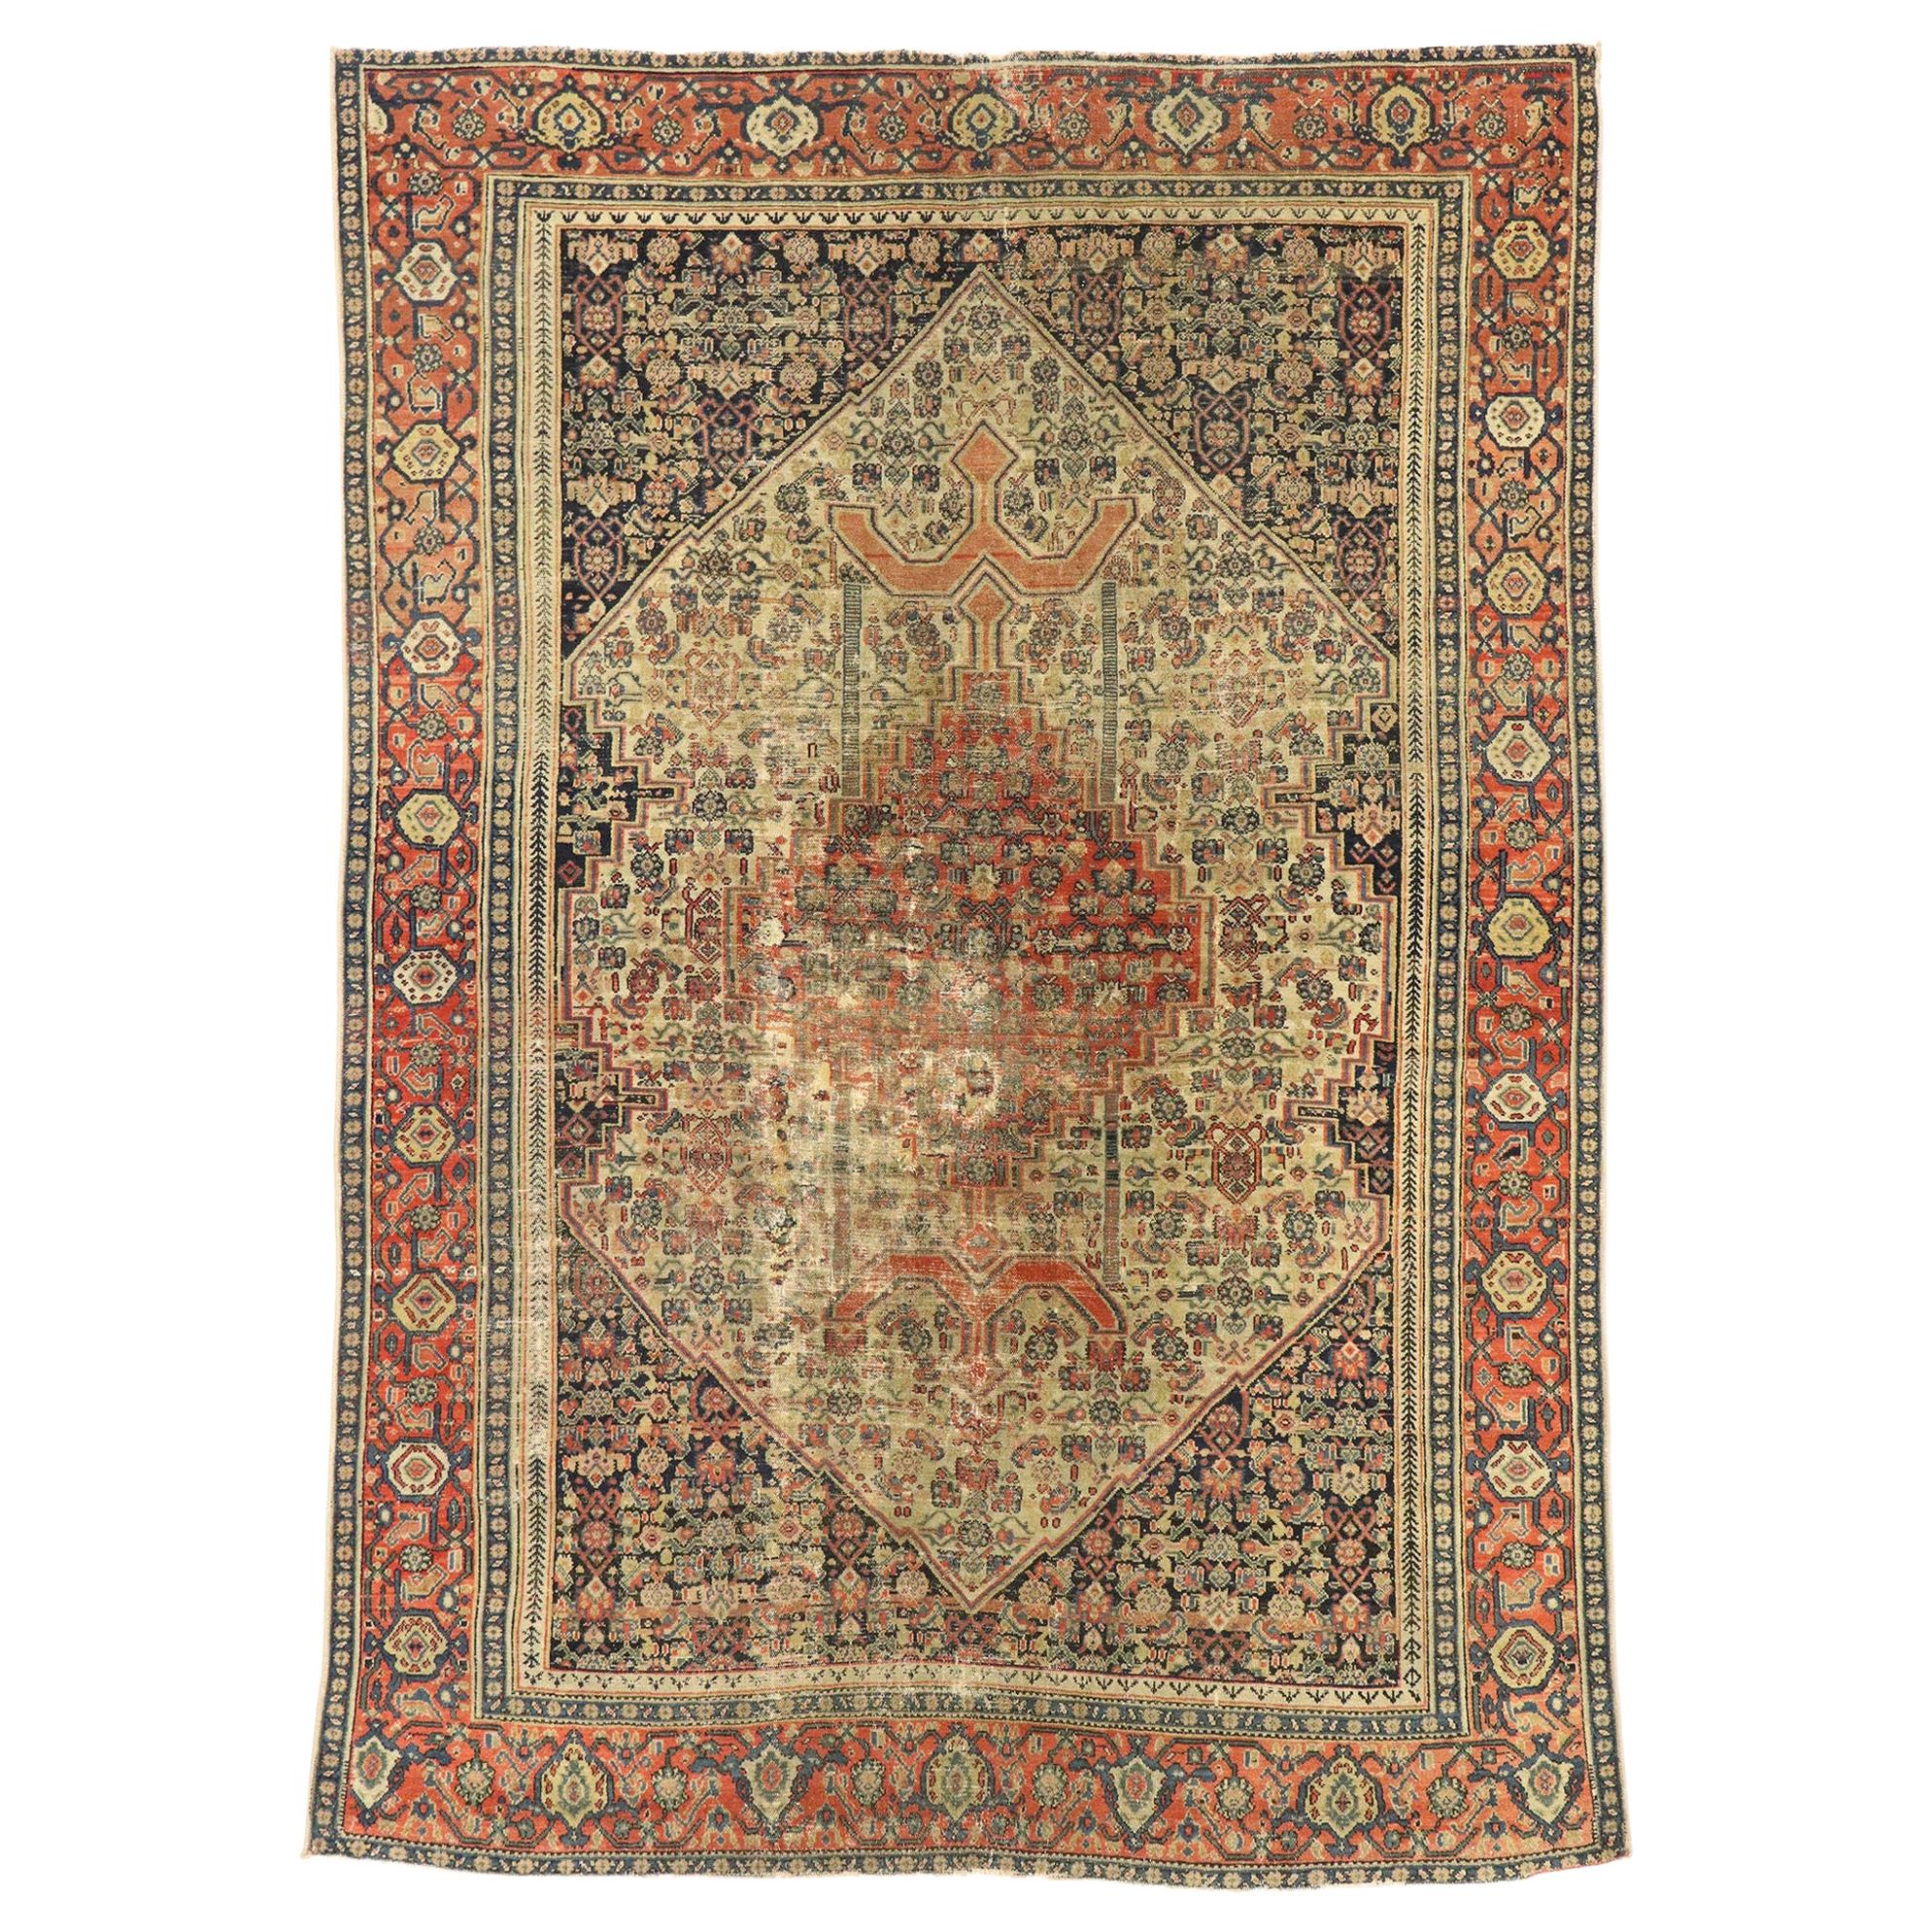 Distressed Antique Persian Malayer Rug with Modern Rustic Industrial Style